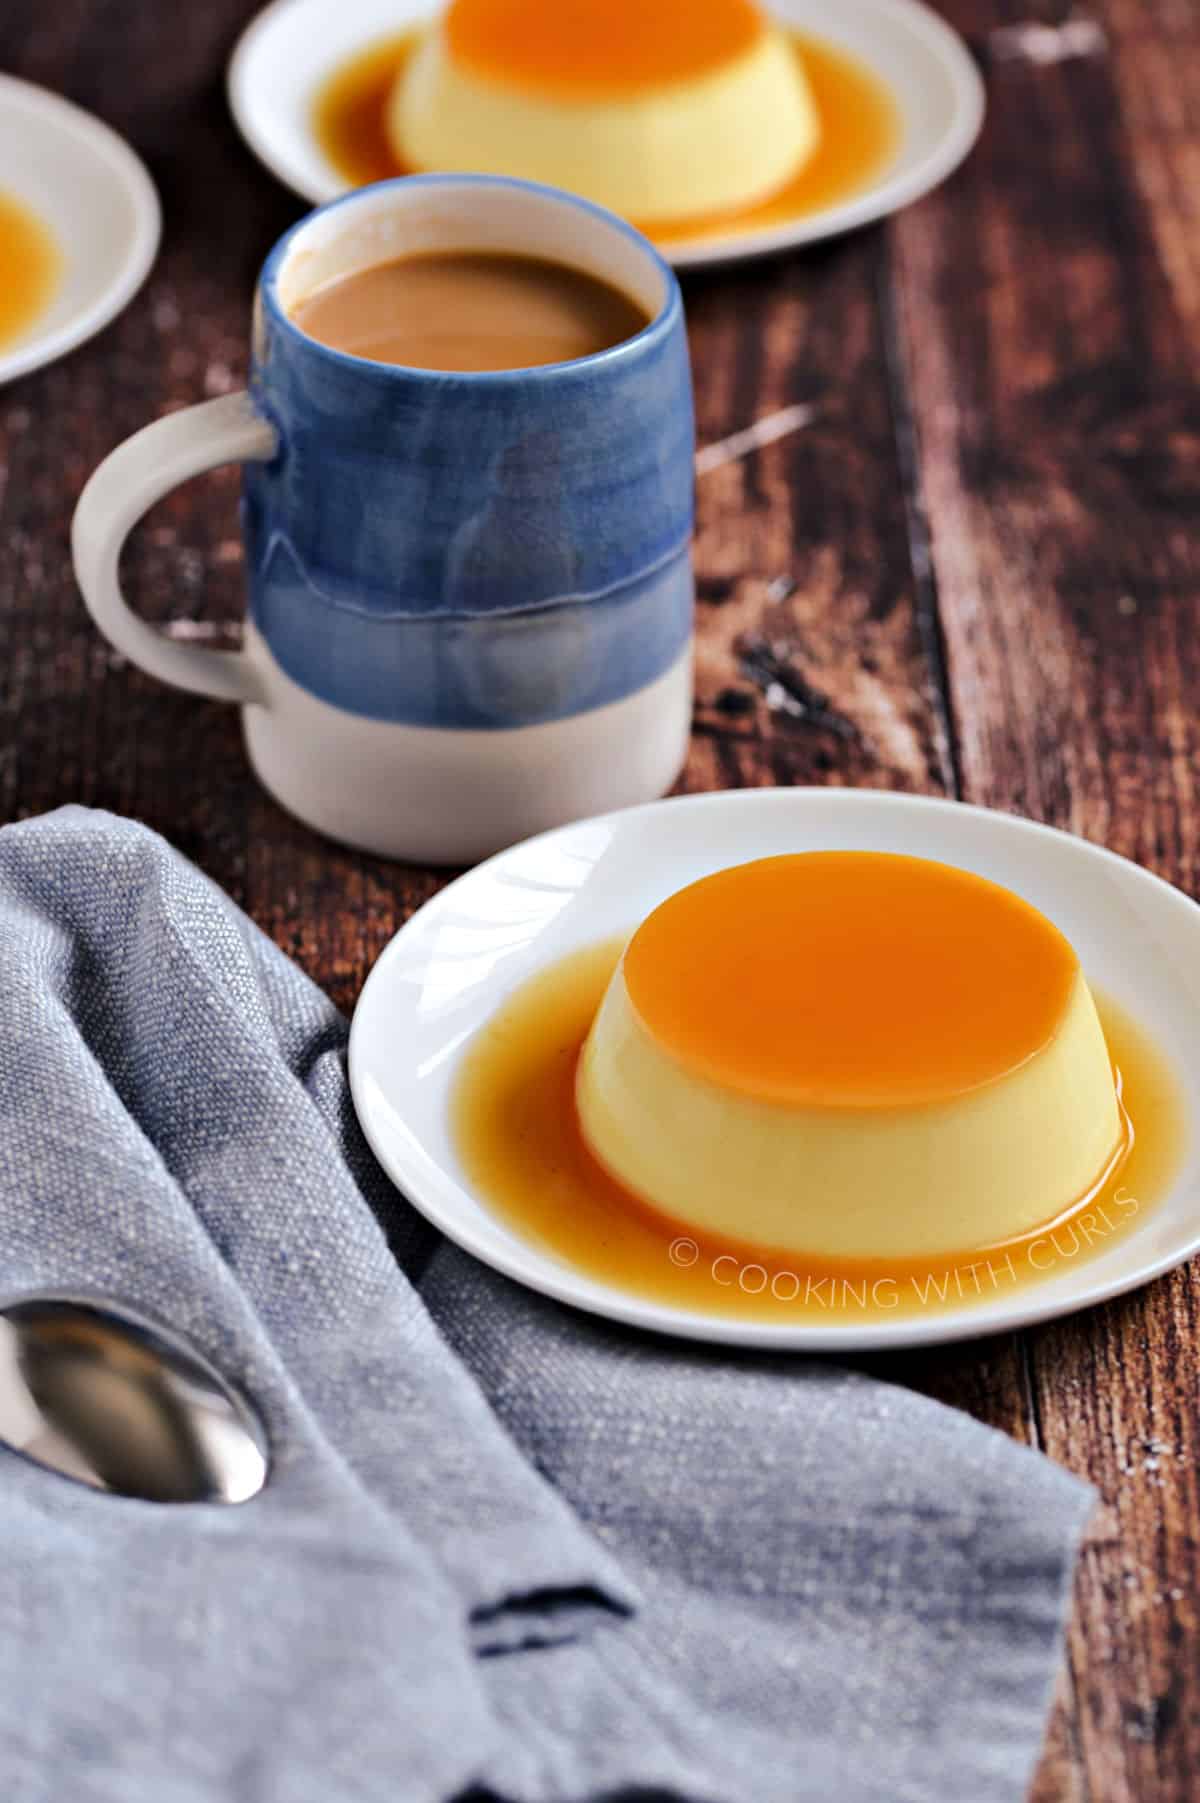 Three small white plates with caramel covered custard and a blue mug filled with coffee.